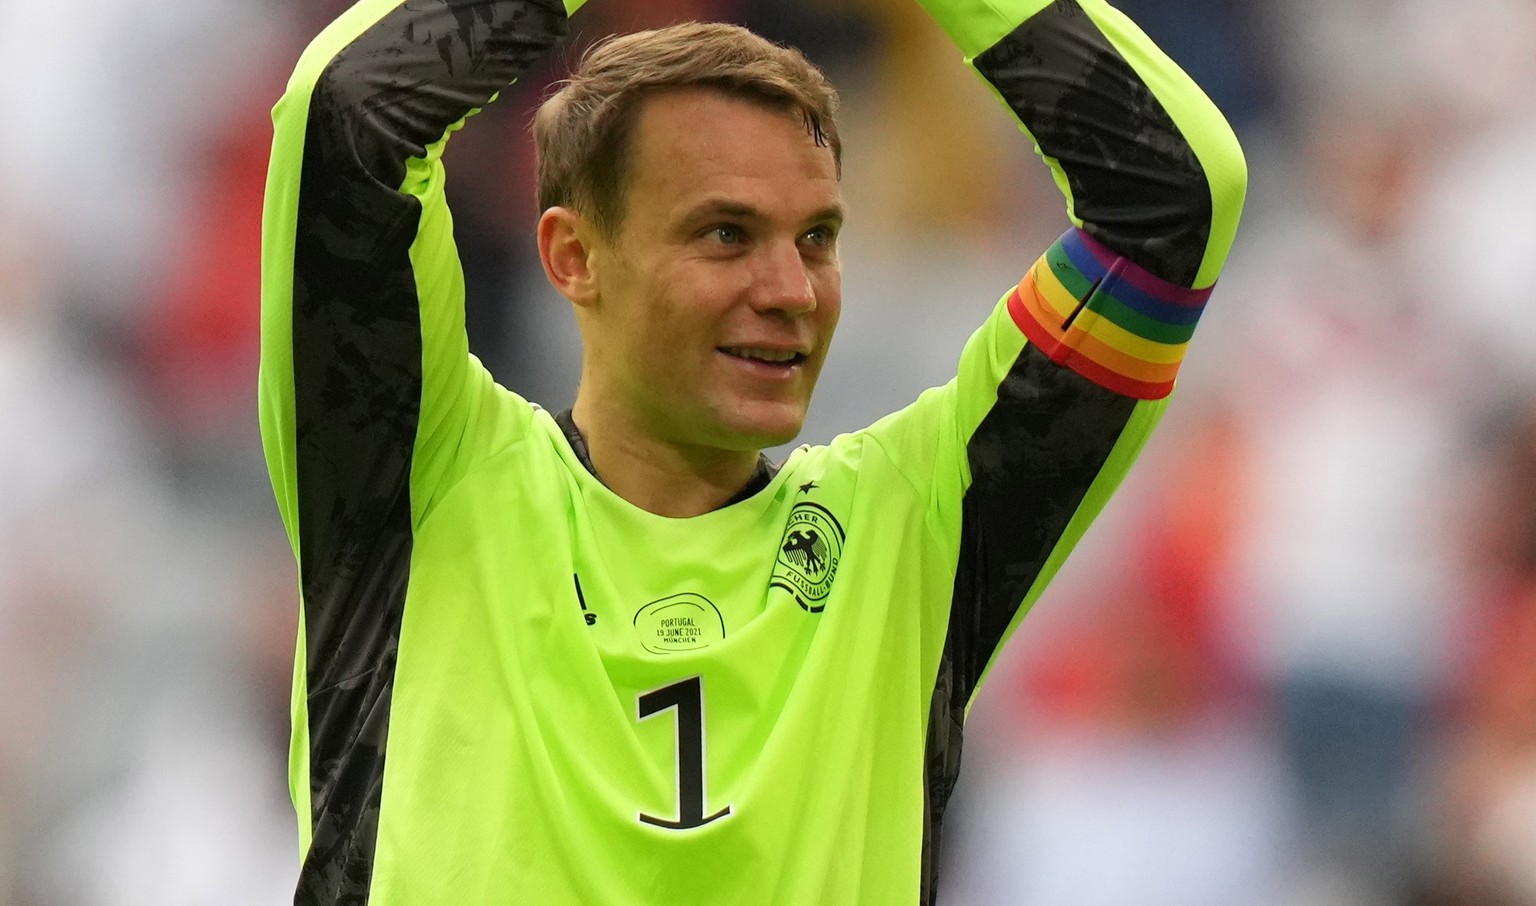 epa09286561 Goalkeeper Manuel Neuer of Germany reacts after the UEFA EURO 2020 group F preliminary round soccer match between Portugal and Germany in Munich, Germany, 19 June 2021. EPA/Matthias Schrad ...